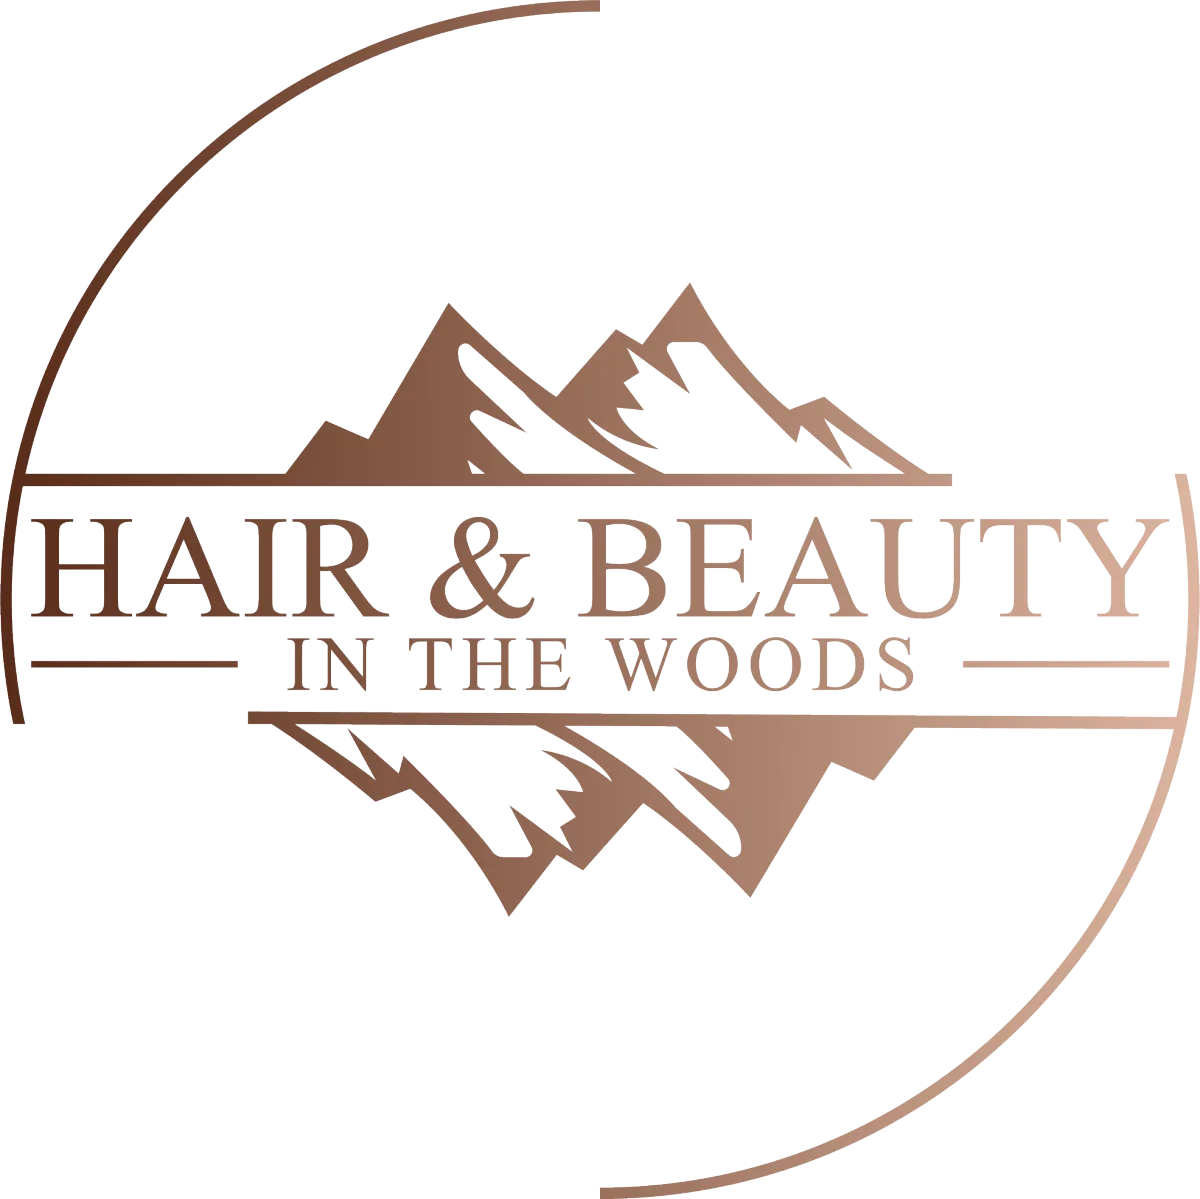 Hair & Beauty In The Woods - Hair and Beauty Services - Logo